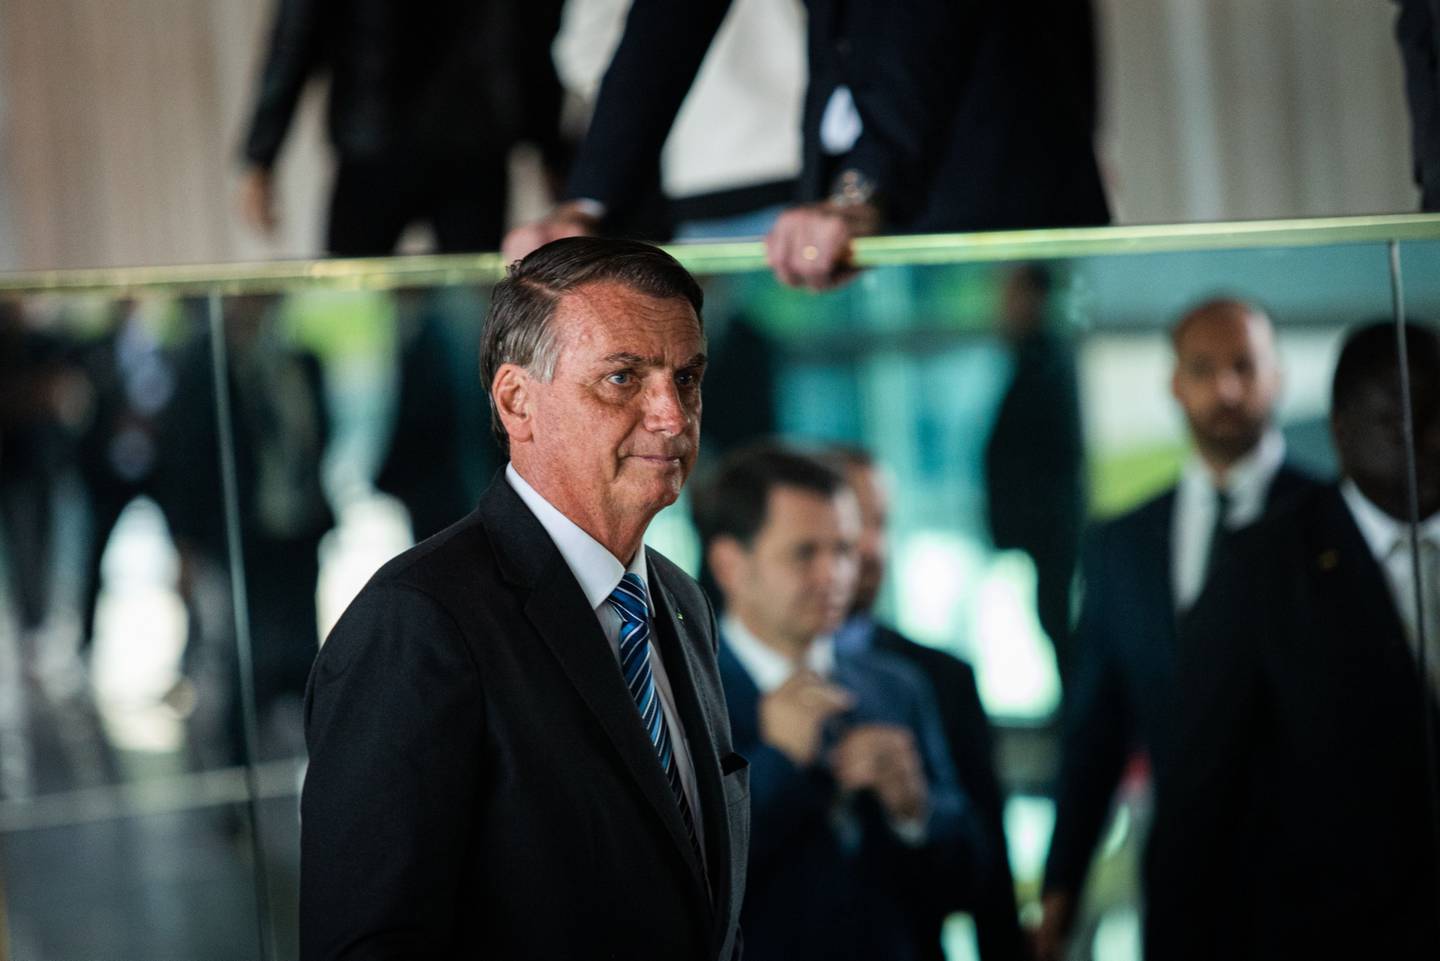 Brazil's President Jair Bolsonaro has signed the country's regulatory framework for cryptocurrencies into law.